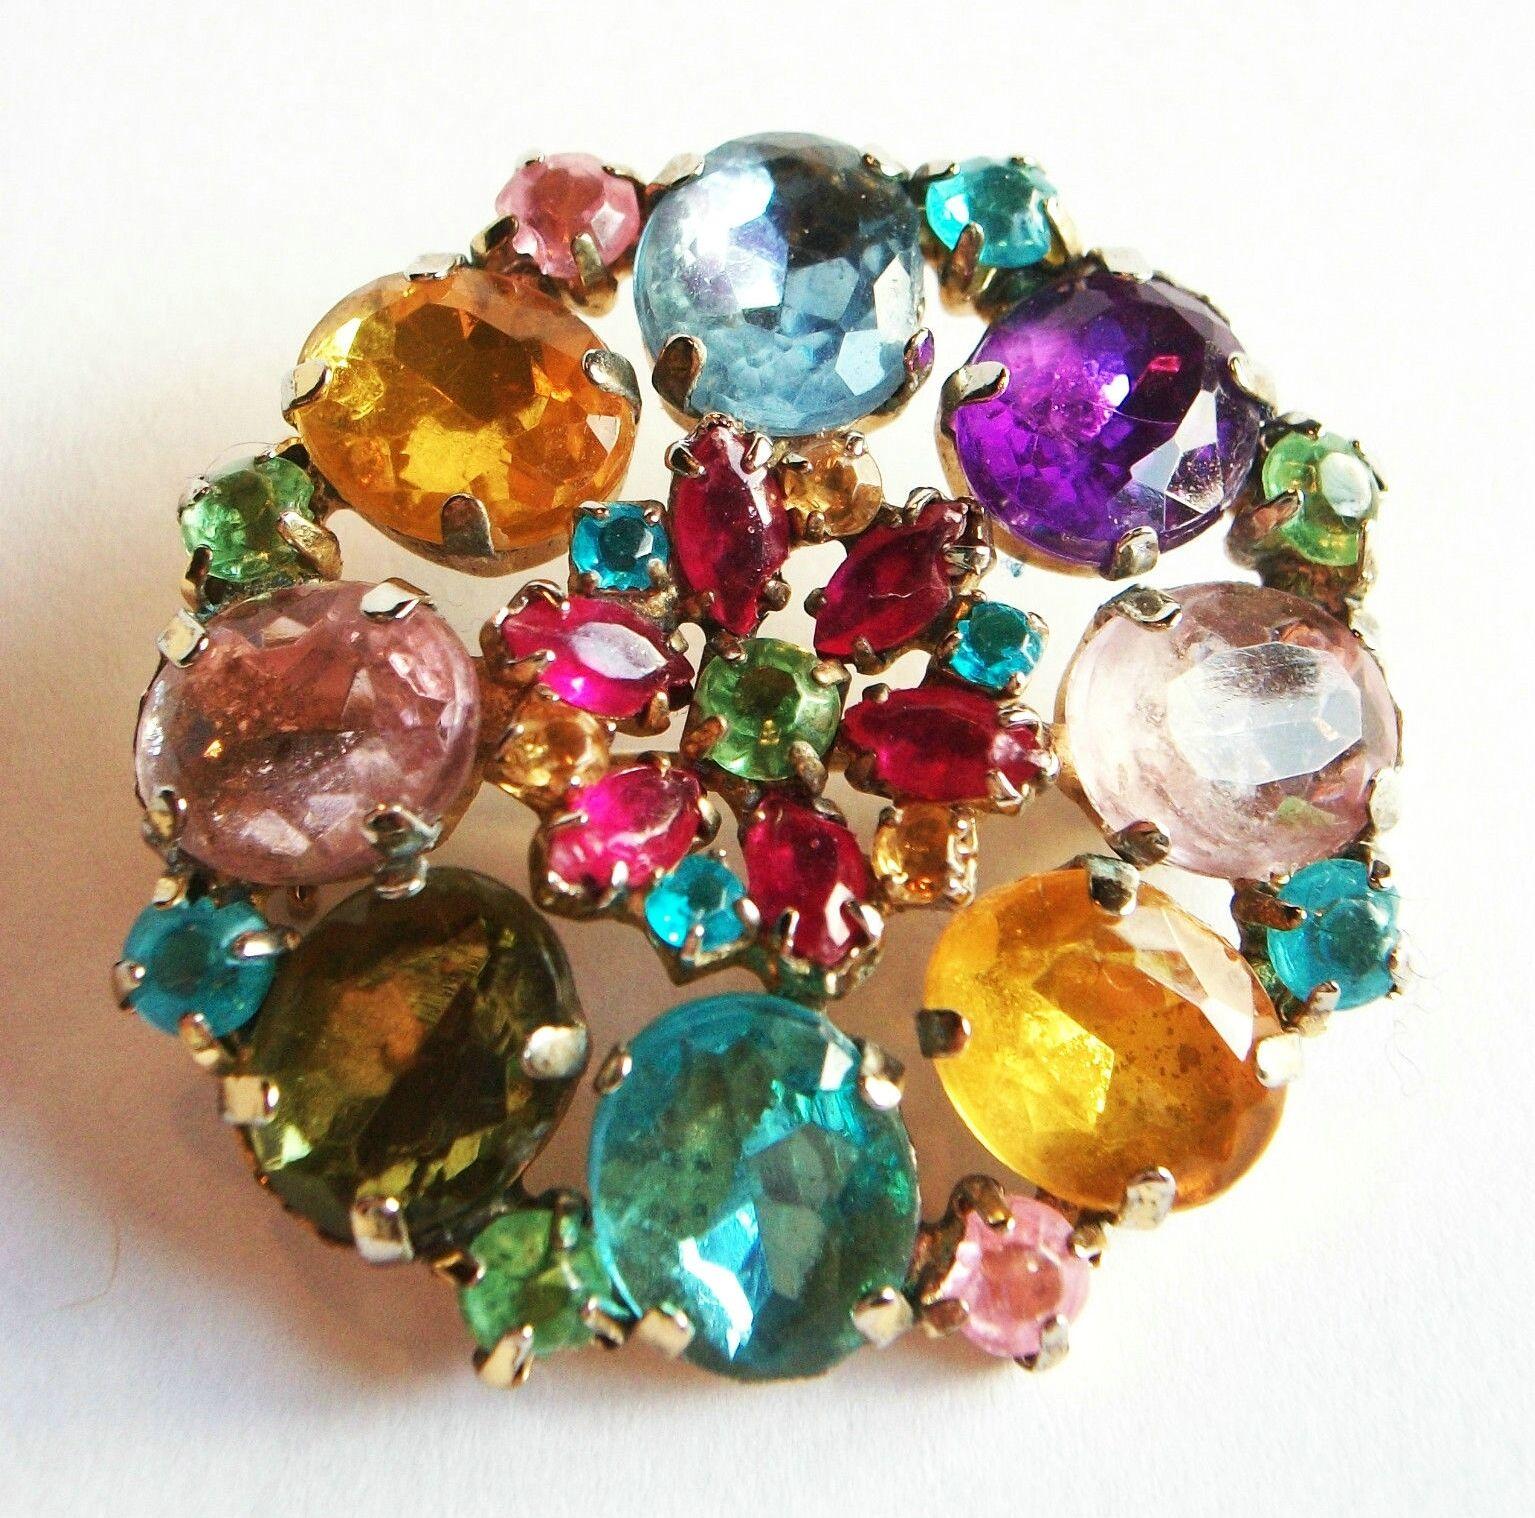 Vintage gold tone brooch set with various shapes, sizes and colors of rhinestones - original hinged pin to the back - unsigned - circa 1950's.

Excellent vintage condition - no loss - no damage - no repairs - sturdy pin and closure - minor